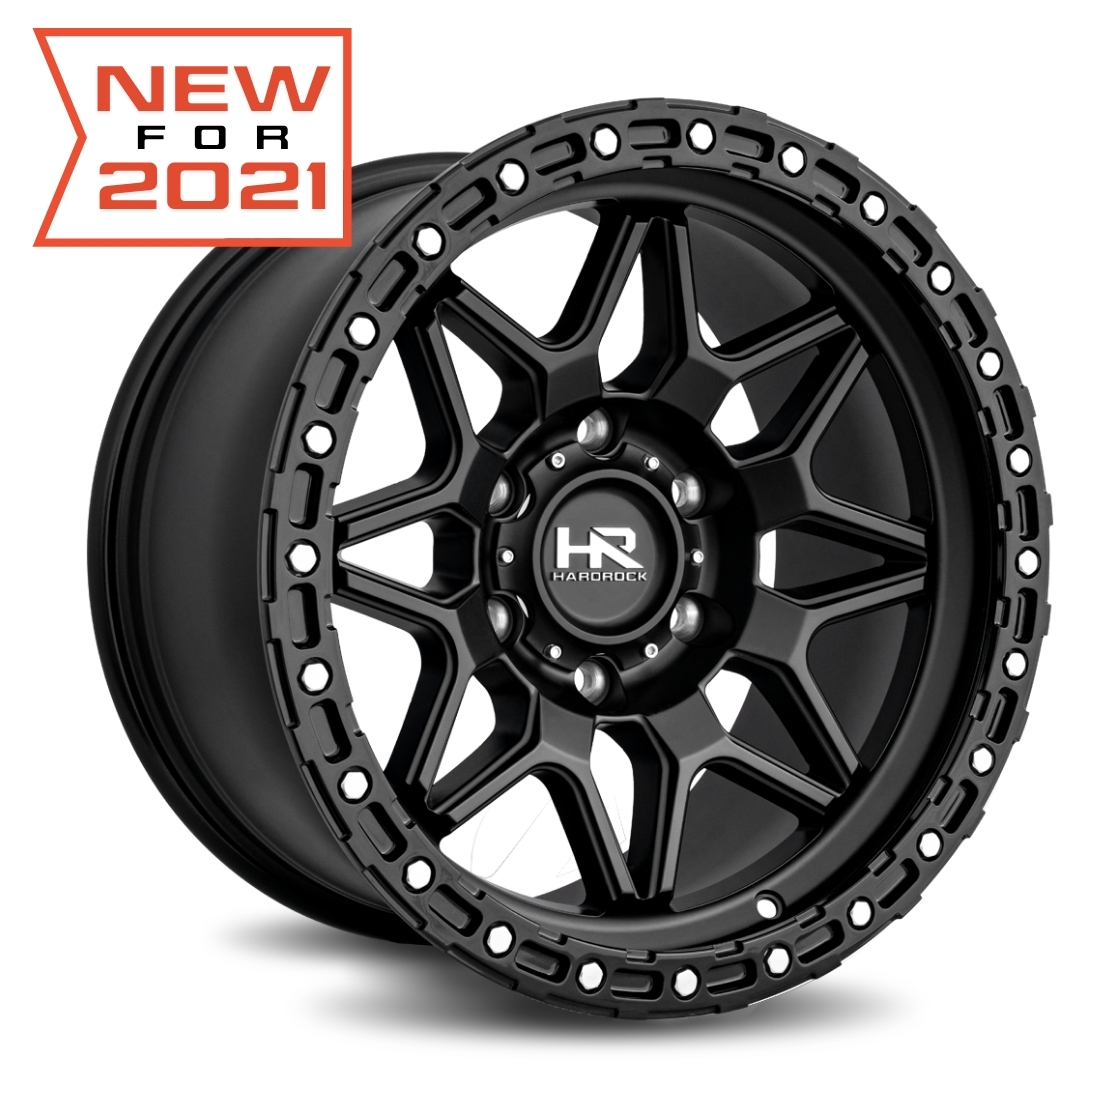 New Aftermarket Off-Road Wheels